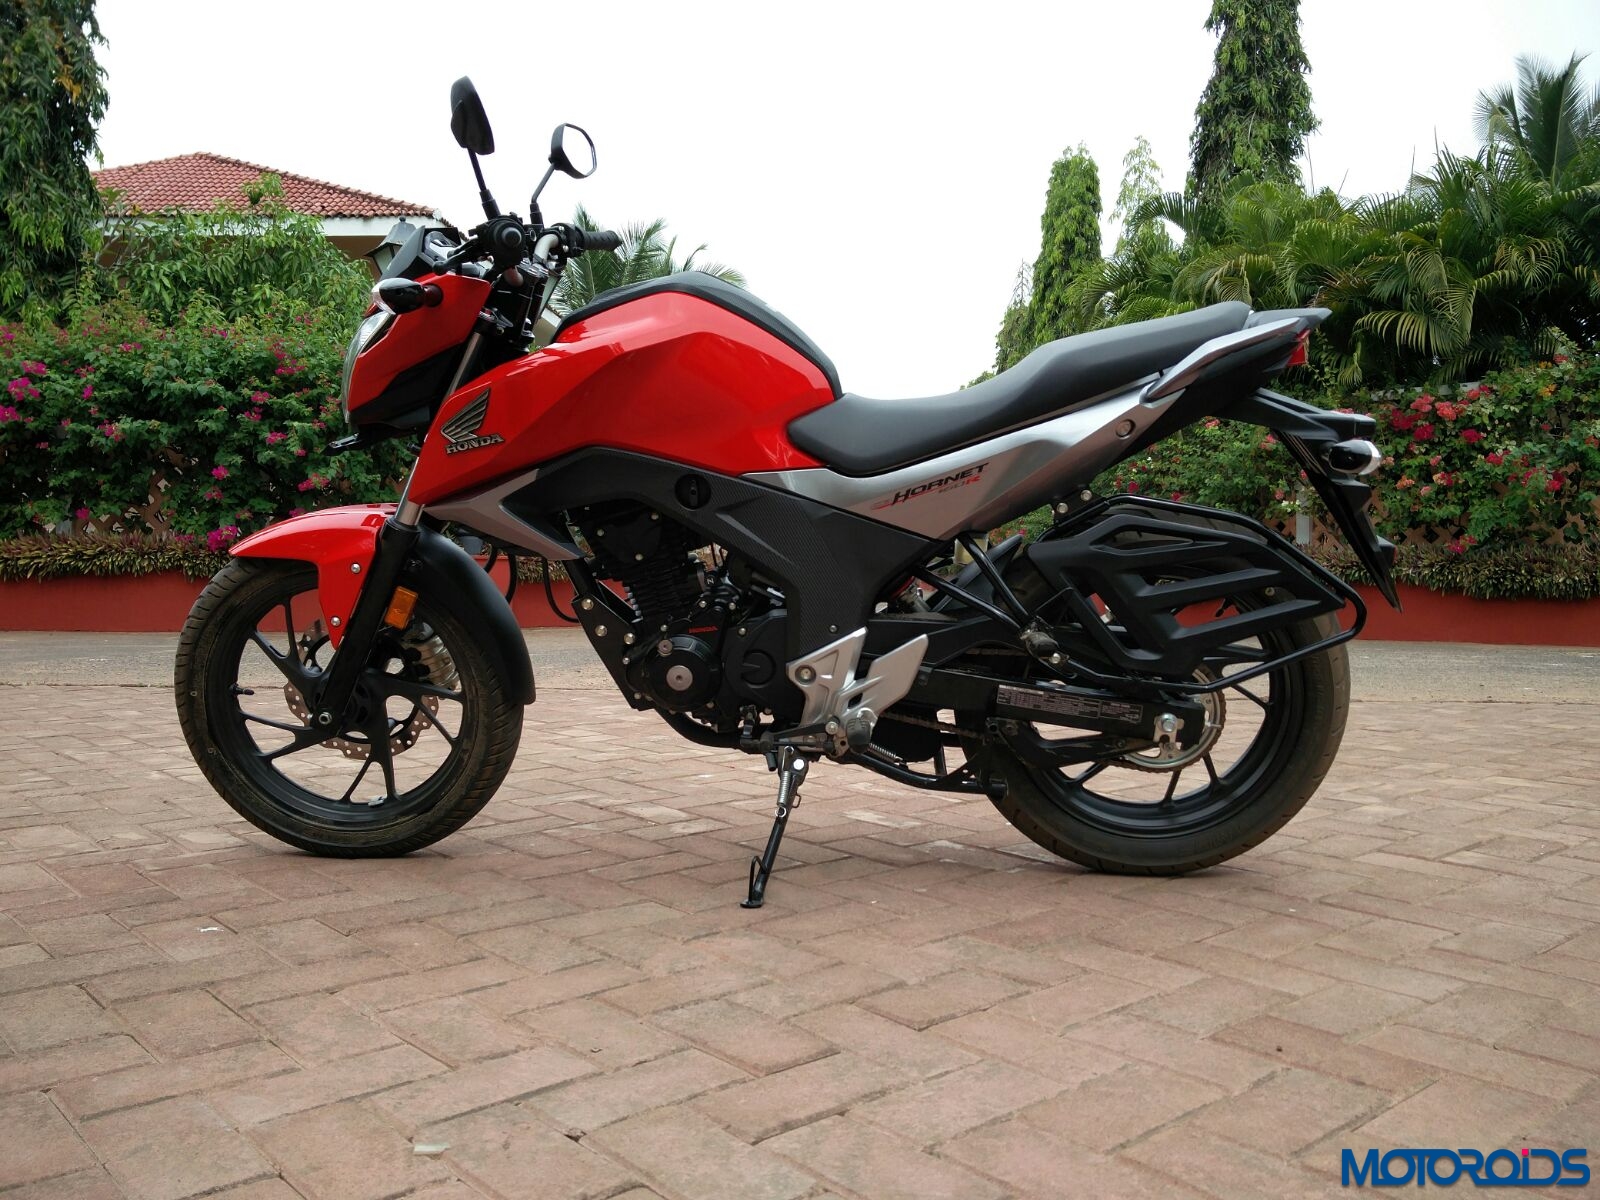 Honda CB Hornet 160R First Ride Review Images Specs And Details